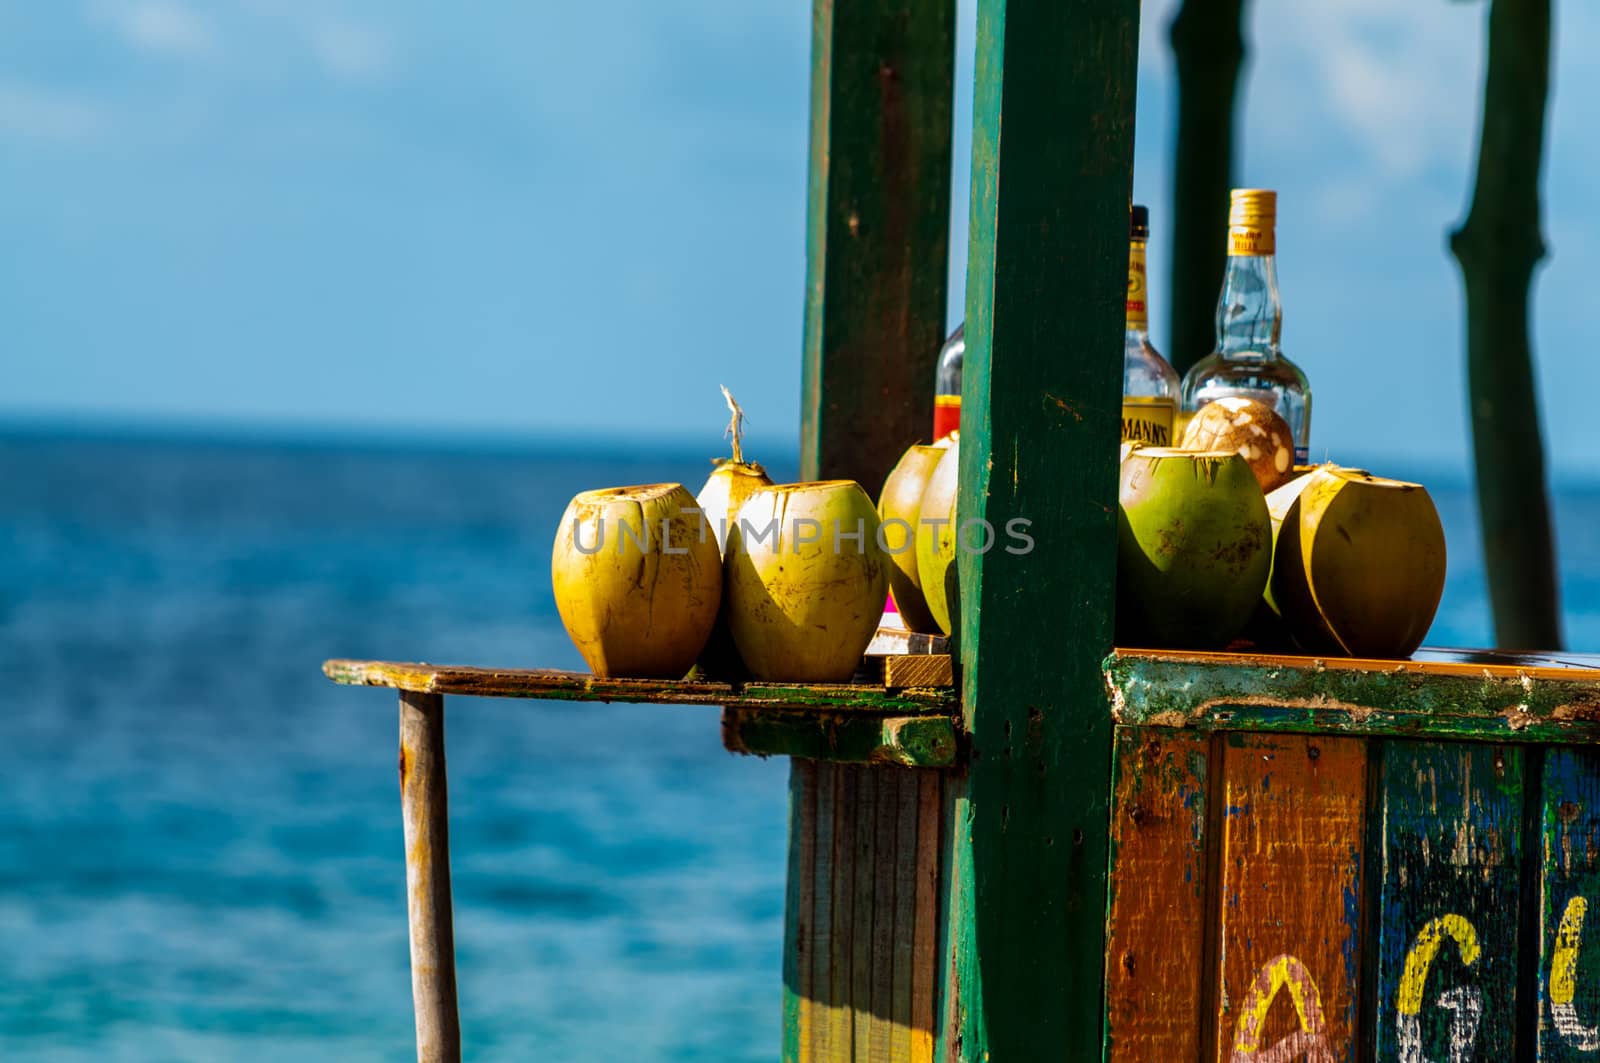 Coconuts to be used to serve cocktails in San Andres, Colombia